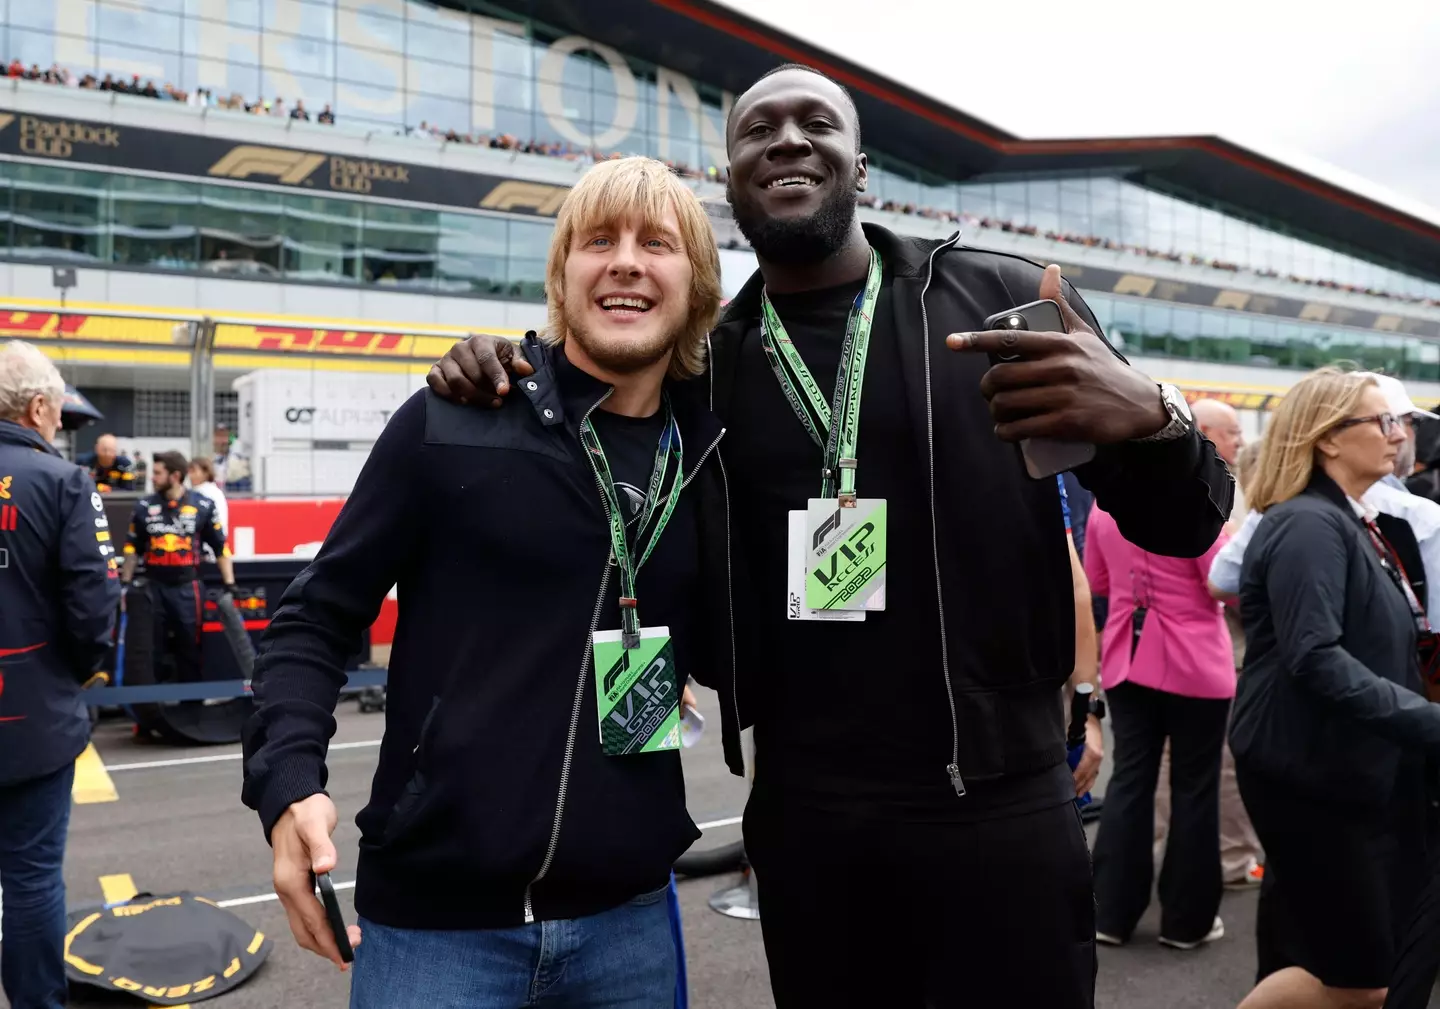 Paddy Pimblett helped Stormzy not fall over after he was thrust into the air by Molly McCann-Pearson.